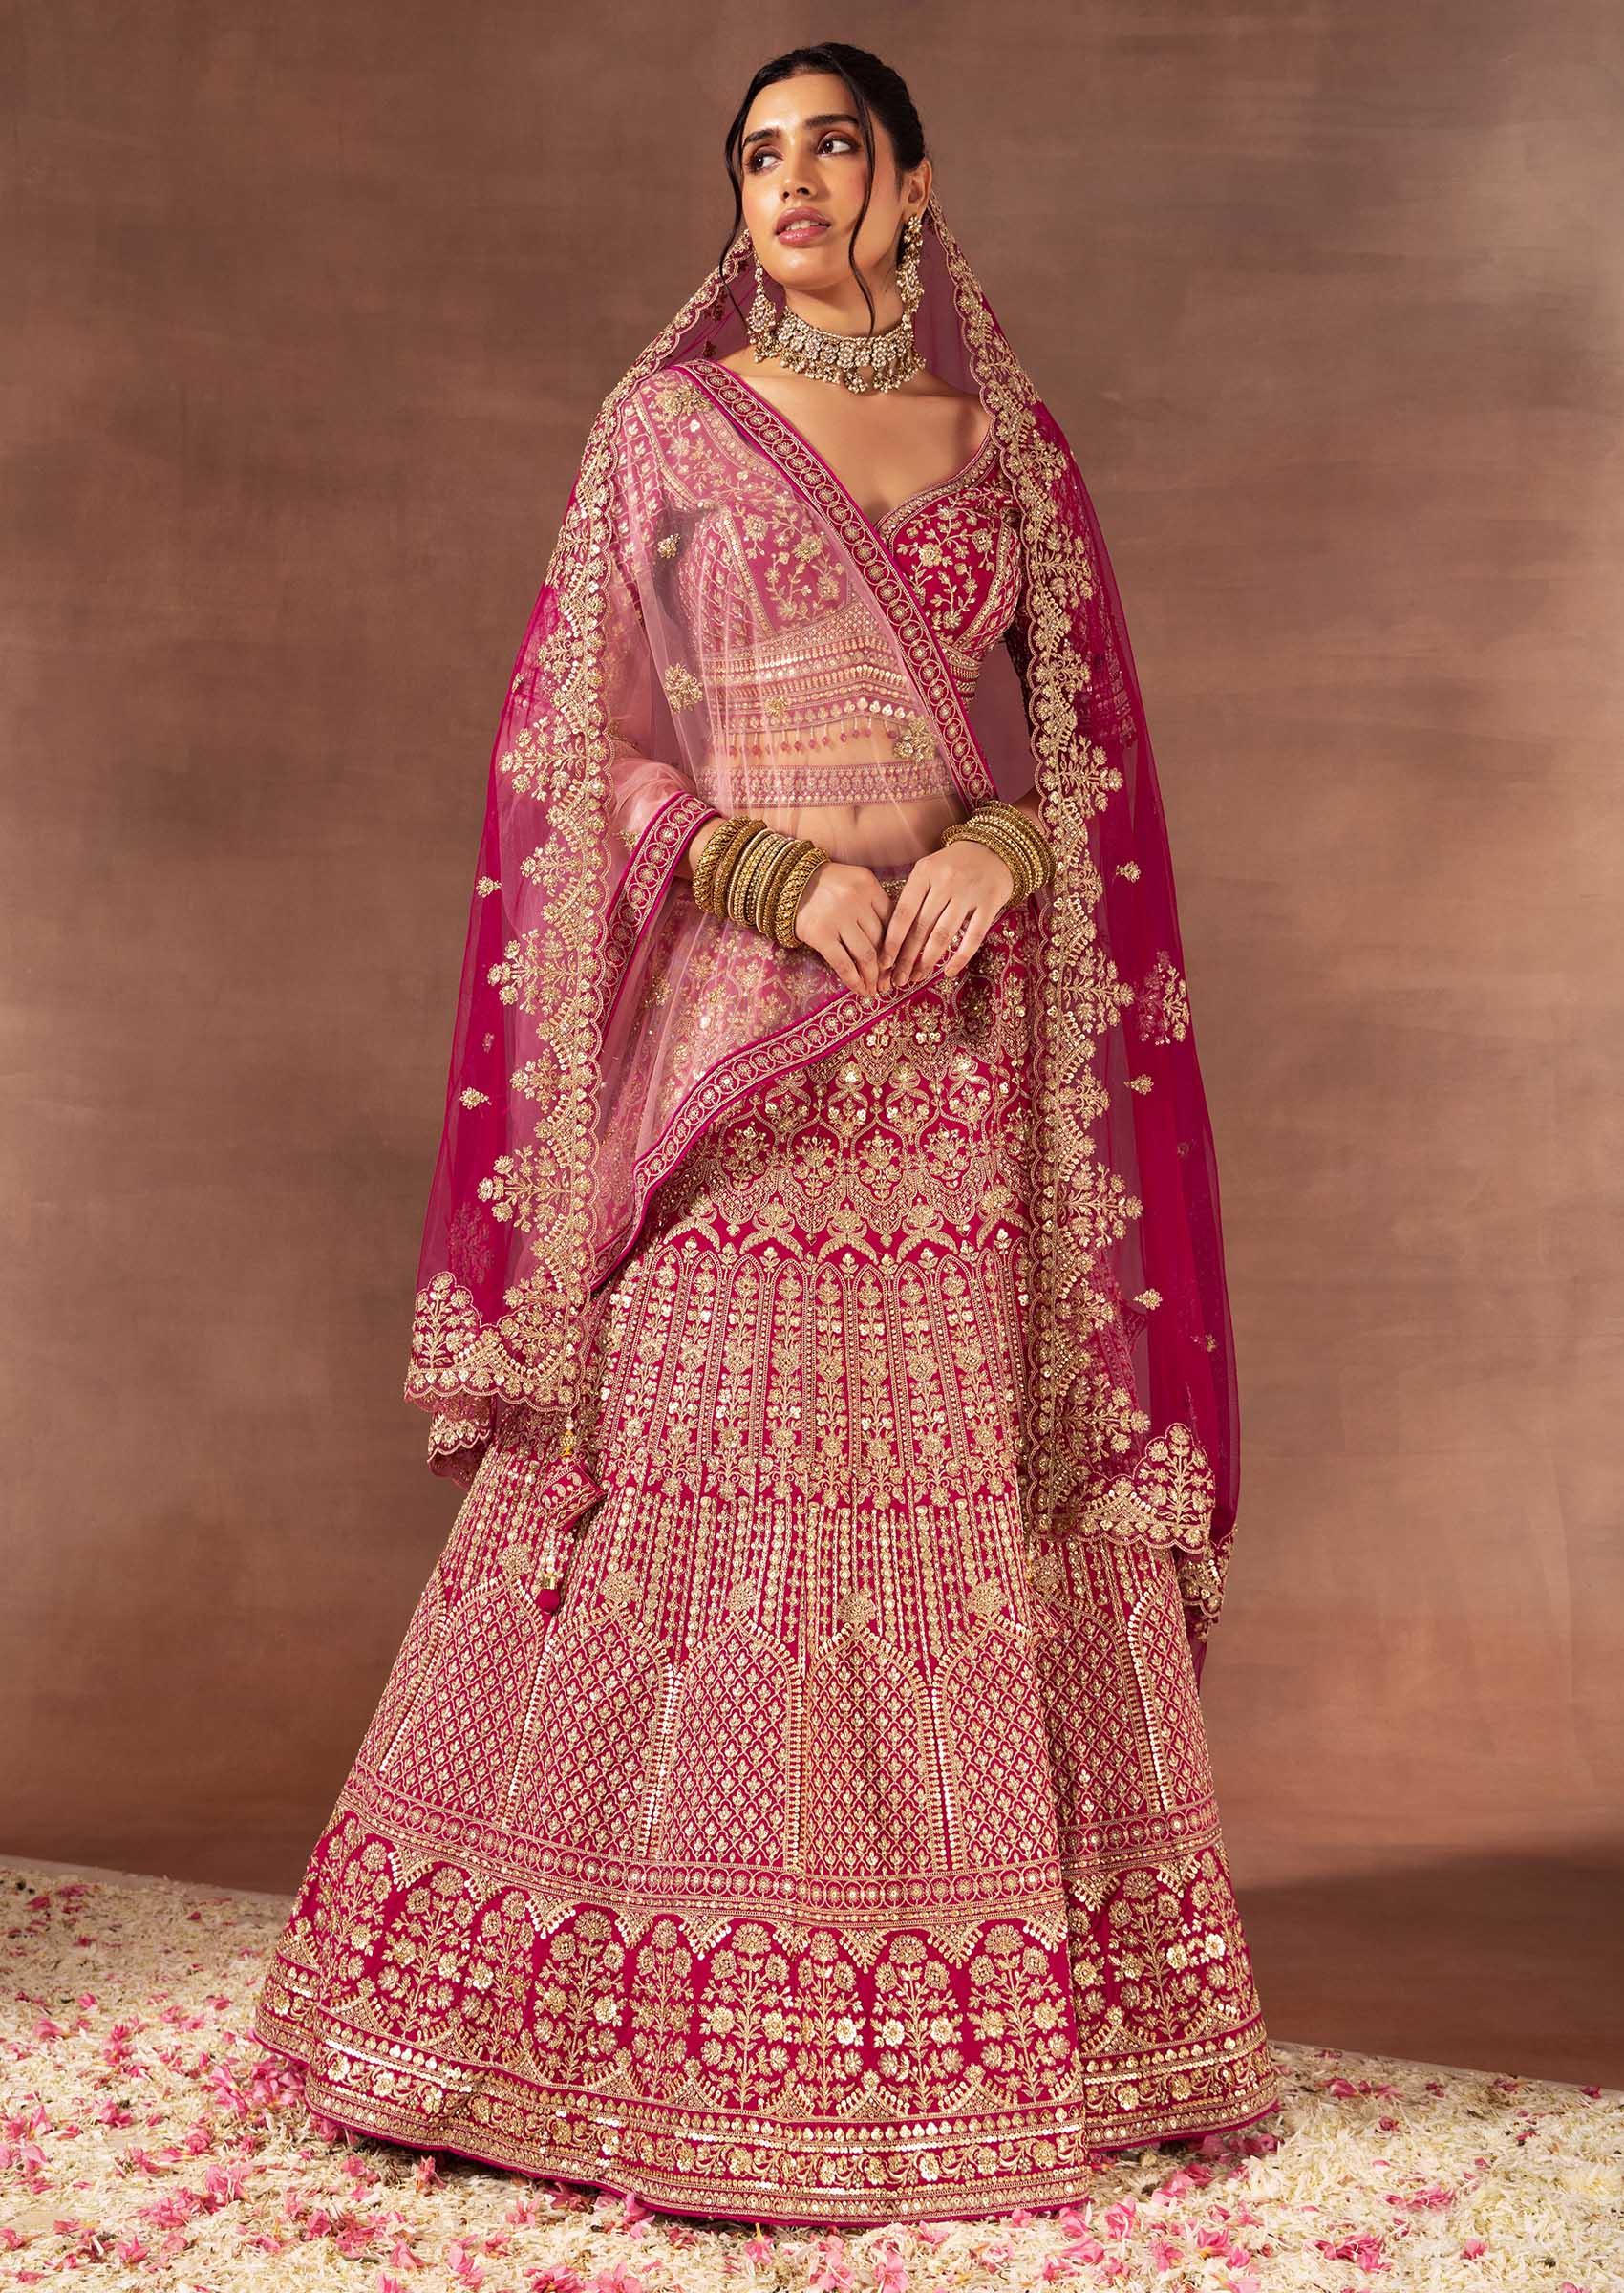 Lehenga: Soft Pink with Silver, Maroon & Pink Florals | Shringar